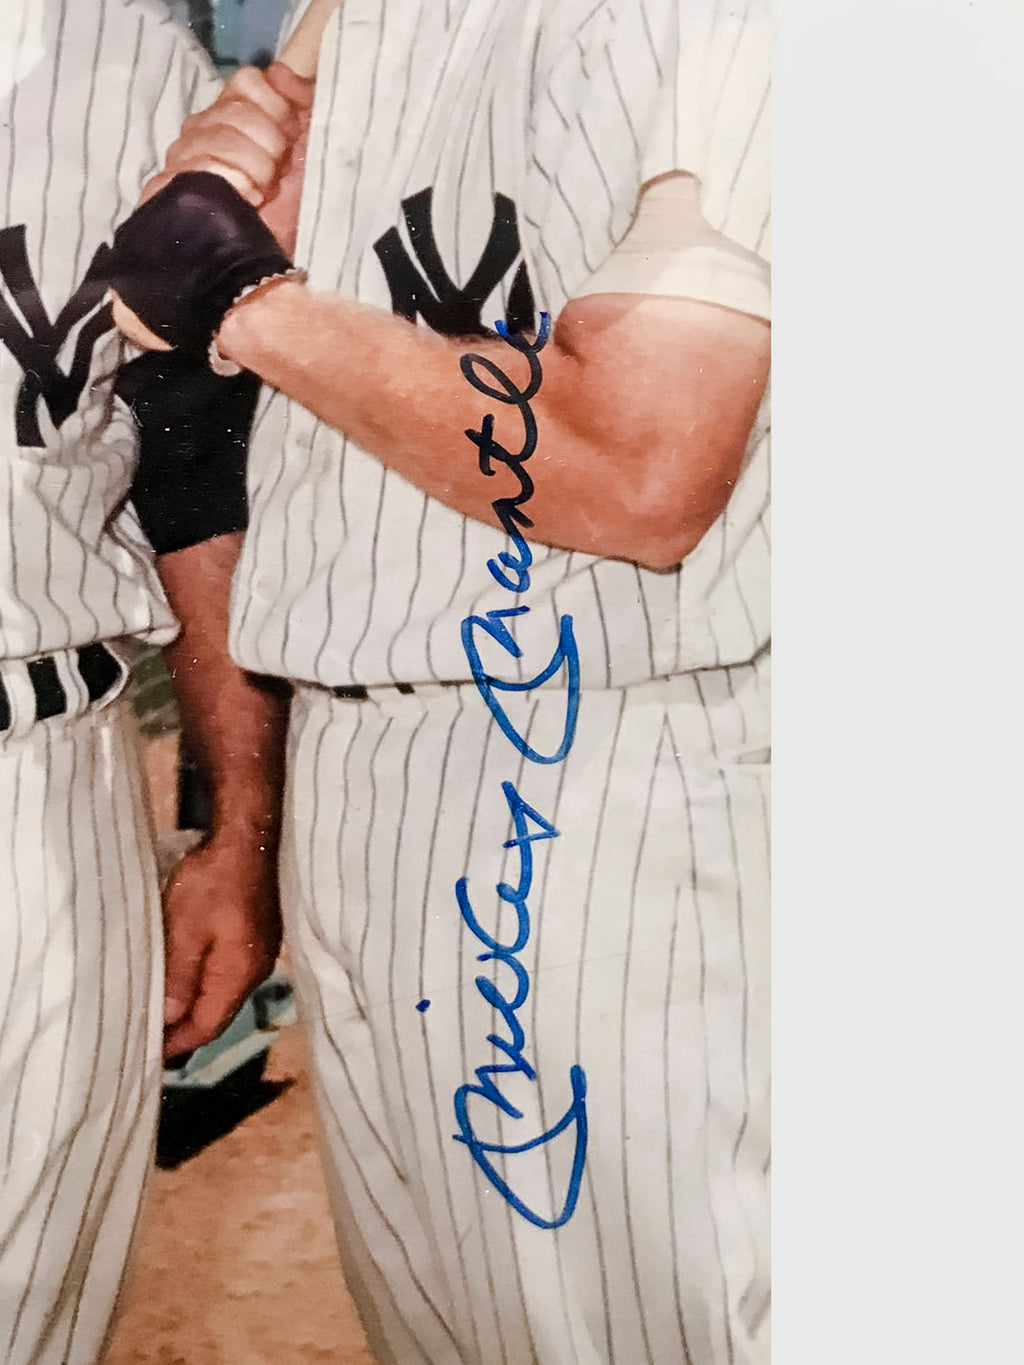 New York Yankees Multi-Signed 20 x 24 Yogi Berra Tribute Metallic Photograph with 25 Signatures and Inscriptions - Limited Edition of 50